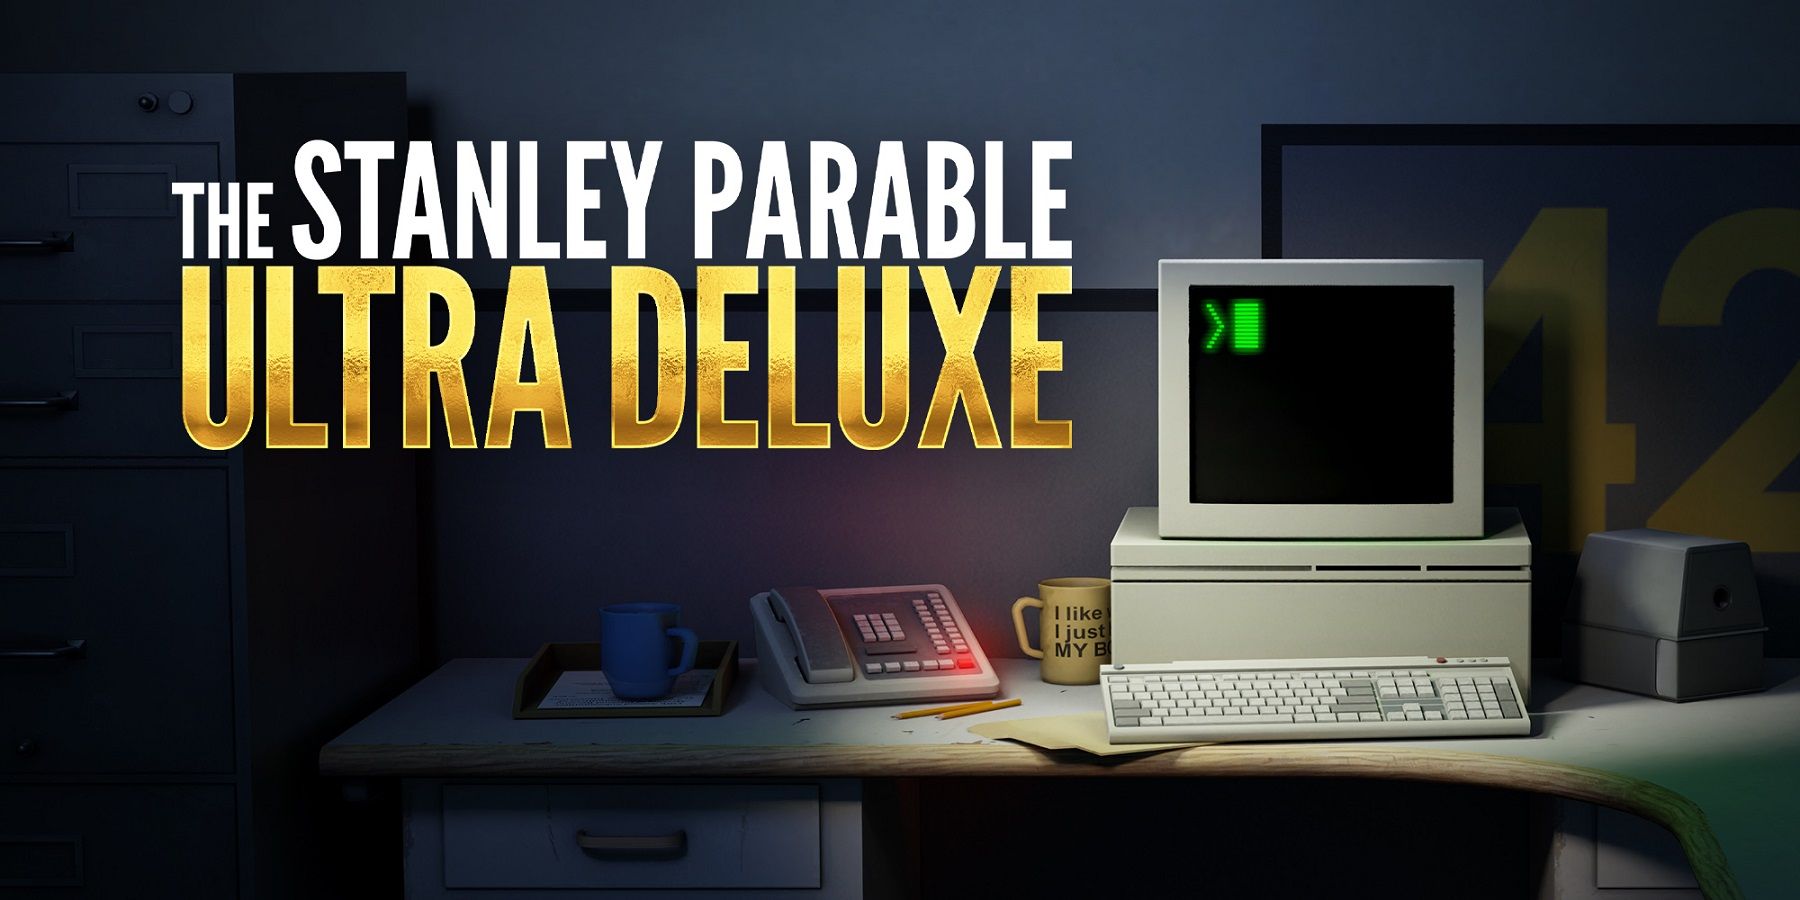 An image from The Stanley Parable Ultra Deluce showing a computer in an office.